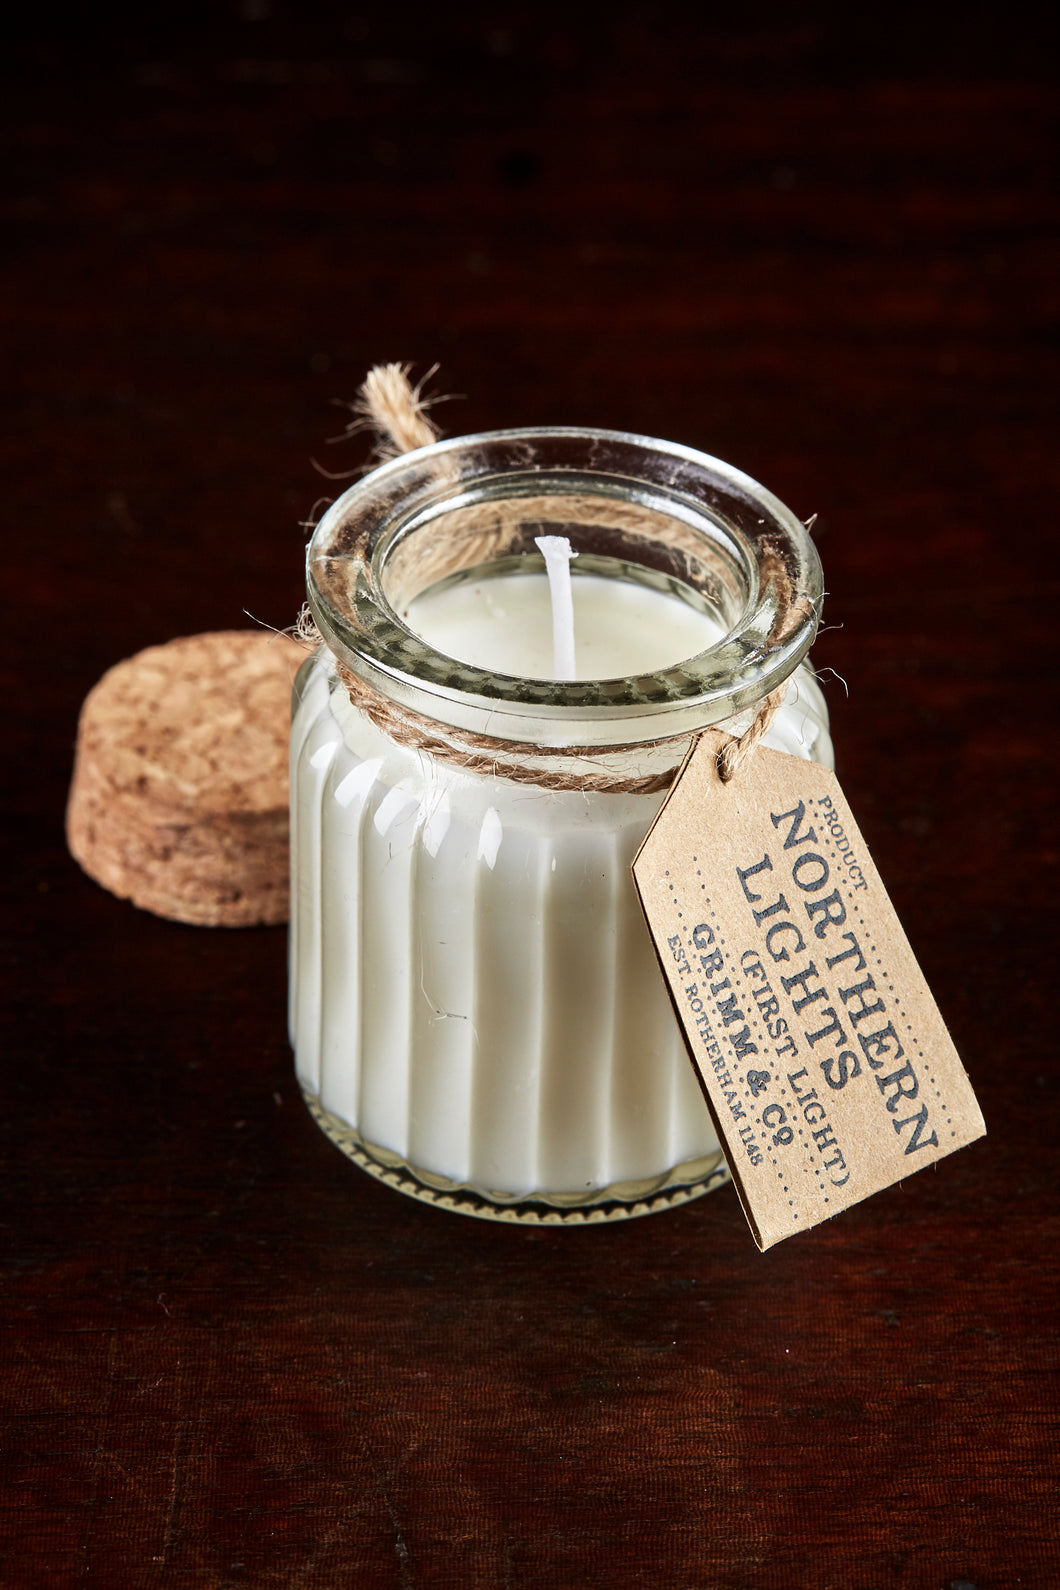 Image shows a Northern Lights Candle called First Light. The candle is white soy wax in a small glass pot with cork lid and is linen fresh scented.